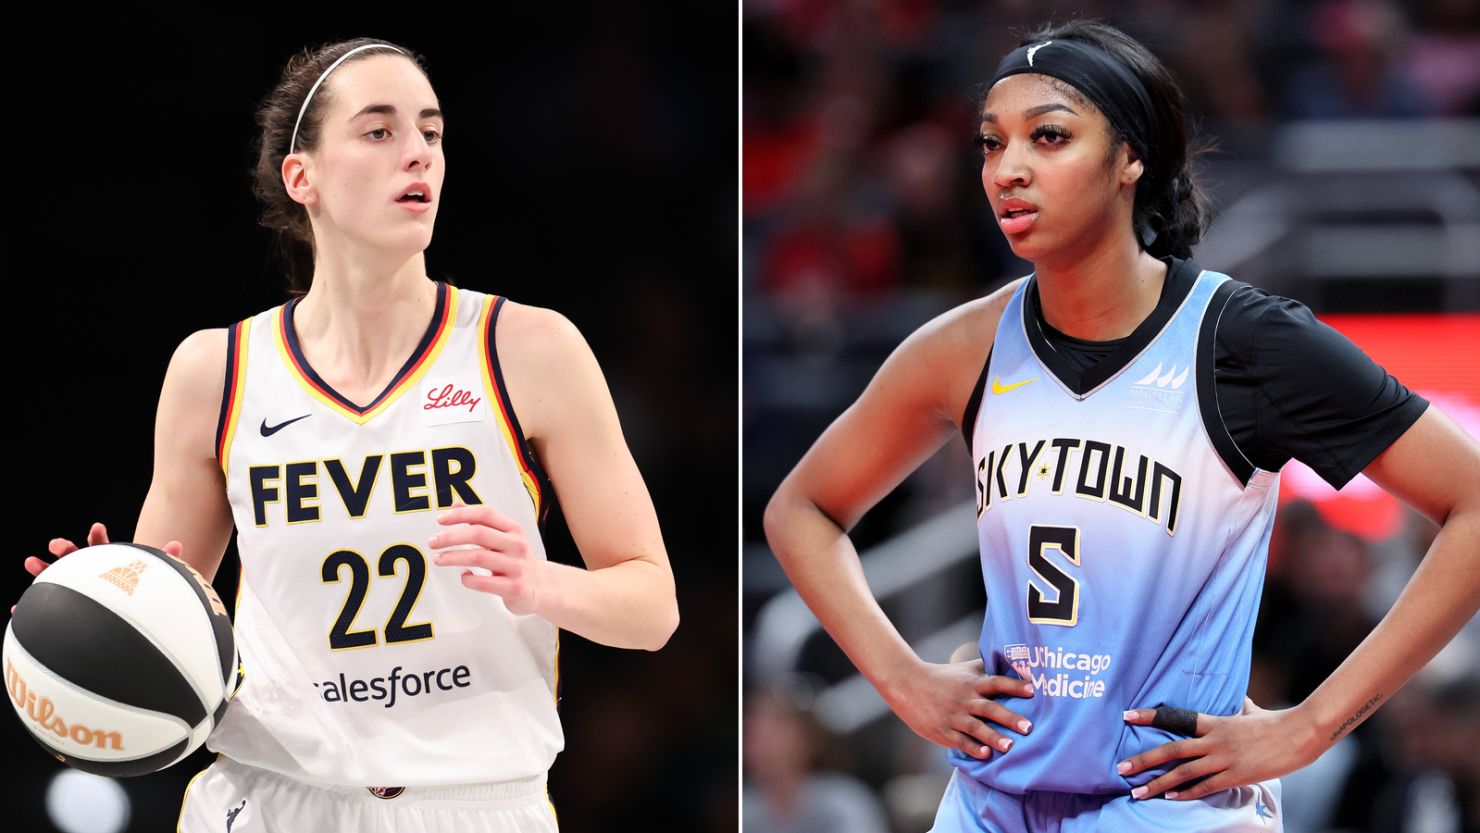 Cailtin Clark, left, and Angel Reese are the first two rookie WNBA All-Stars in the same season since 2014.